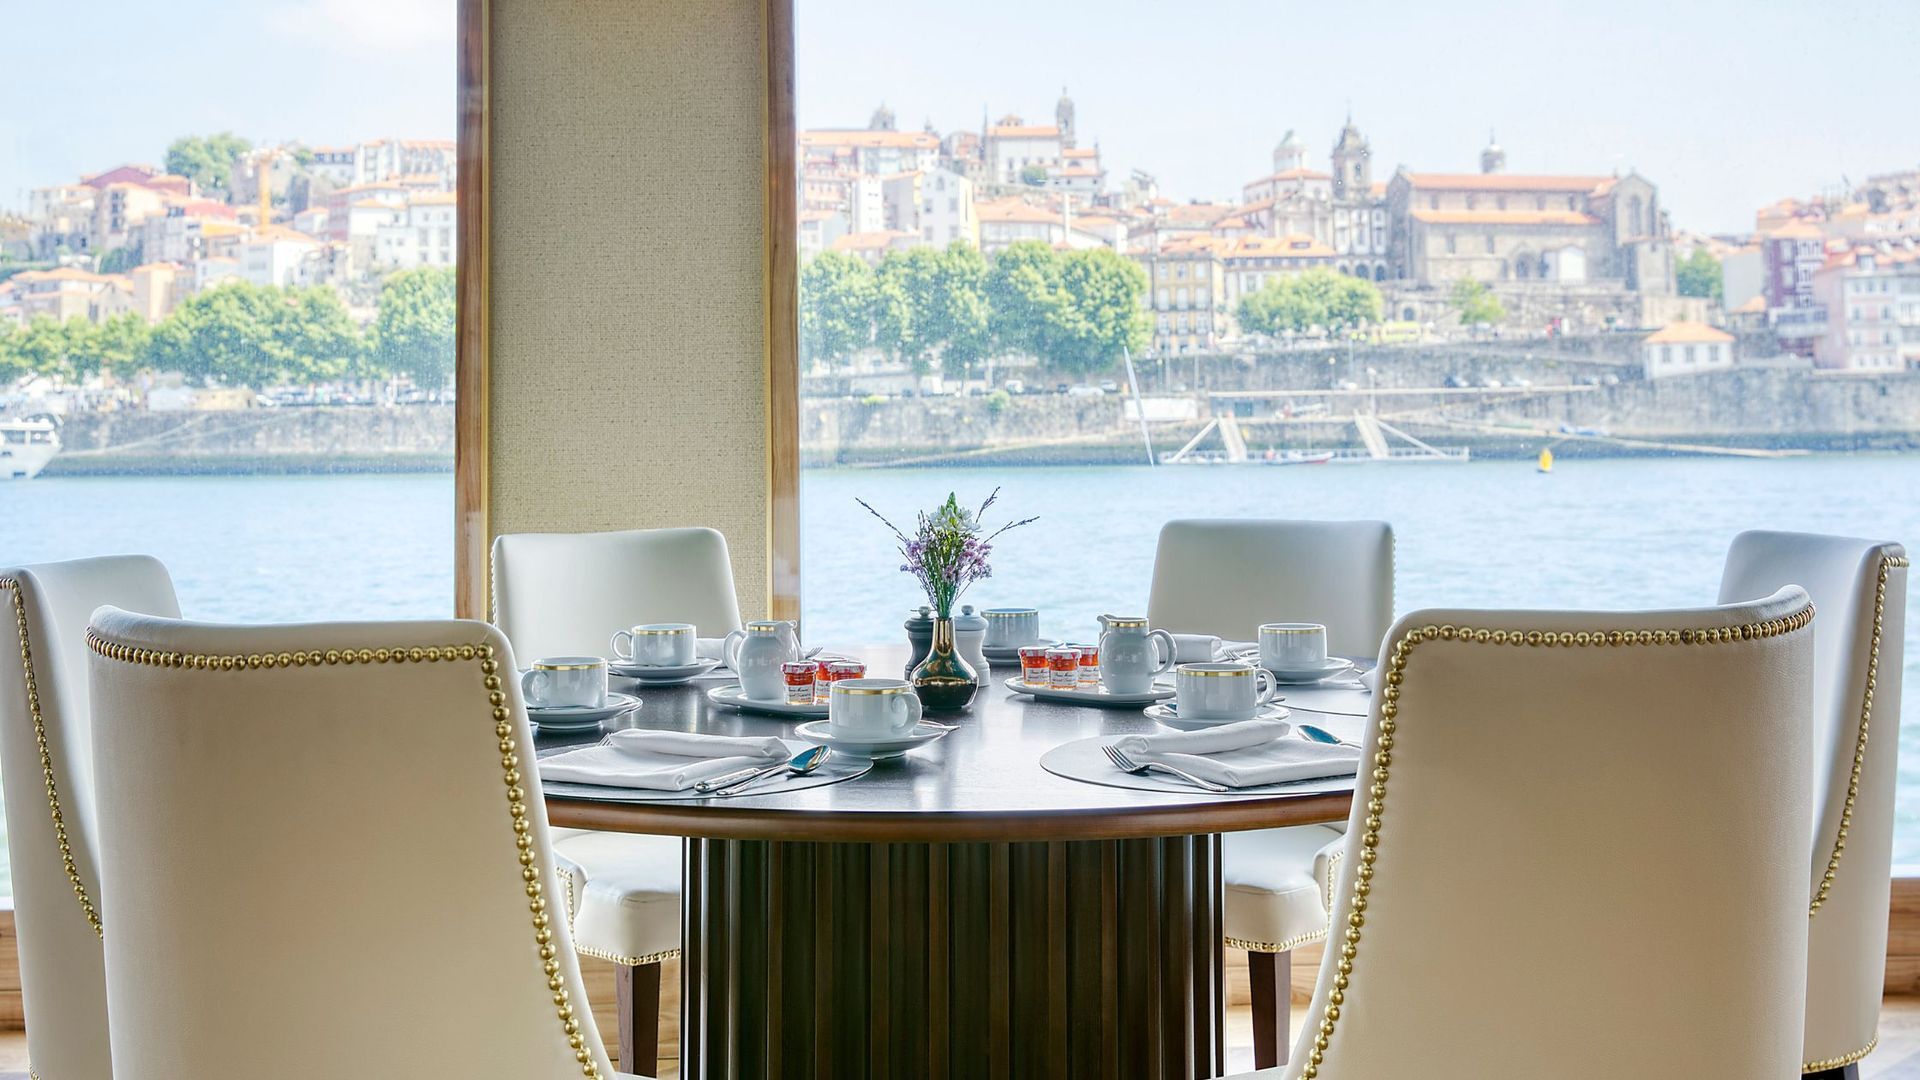 SS São Gabriel River Cruise, A dining room table and chairs with a view of the water